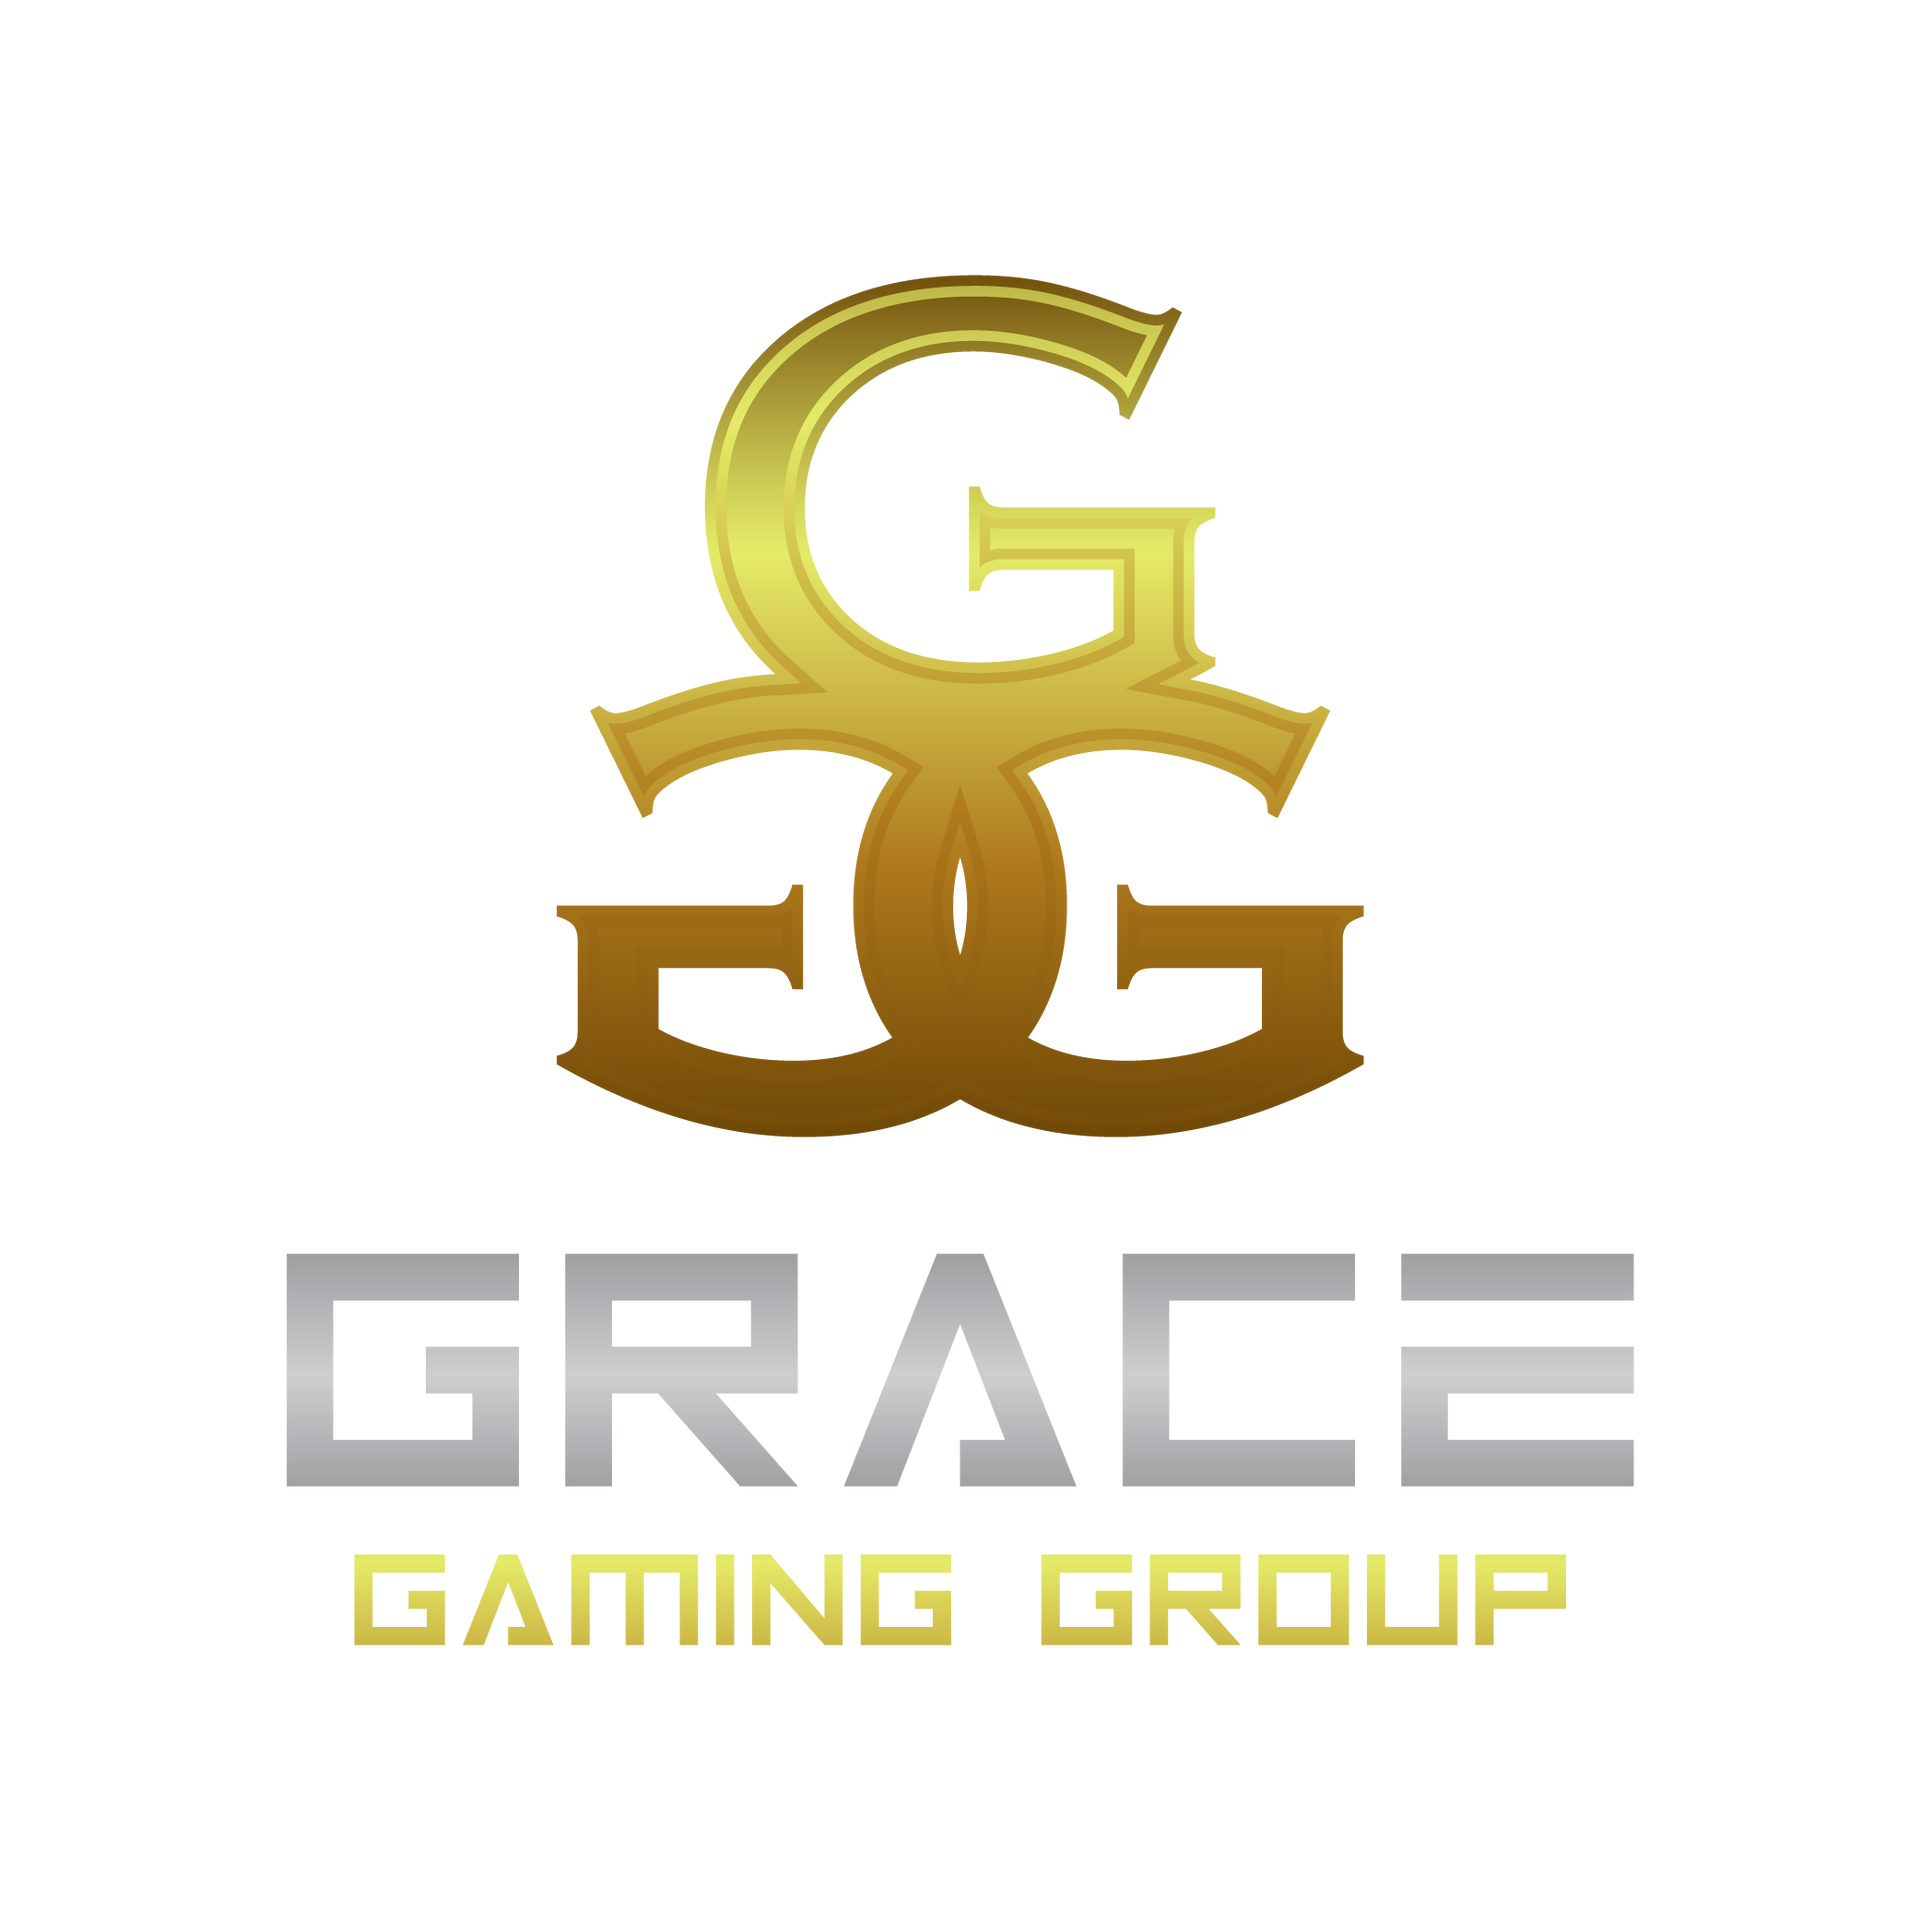 The logo for grace gaming group is a gold and silver logo.